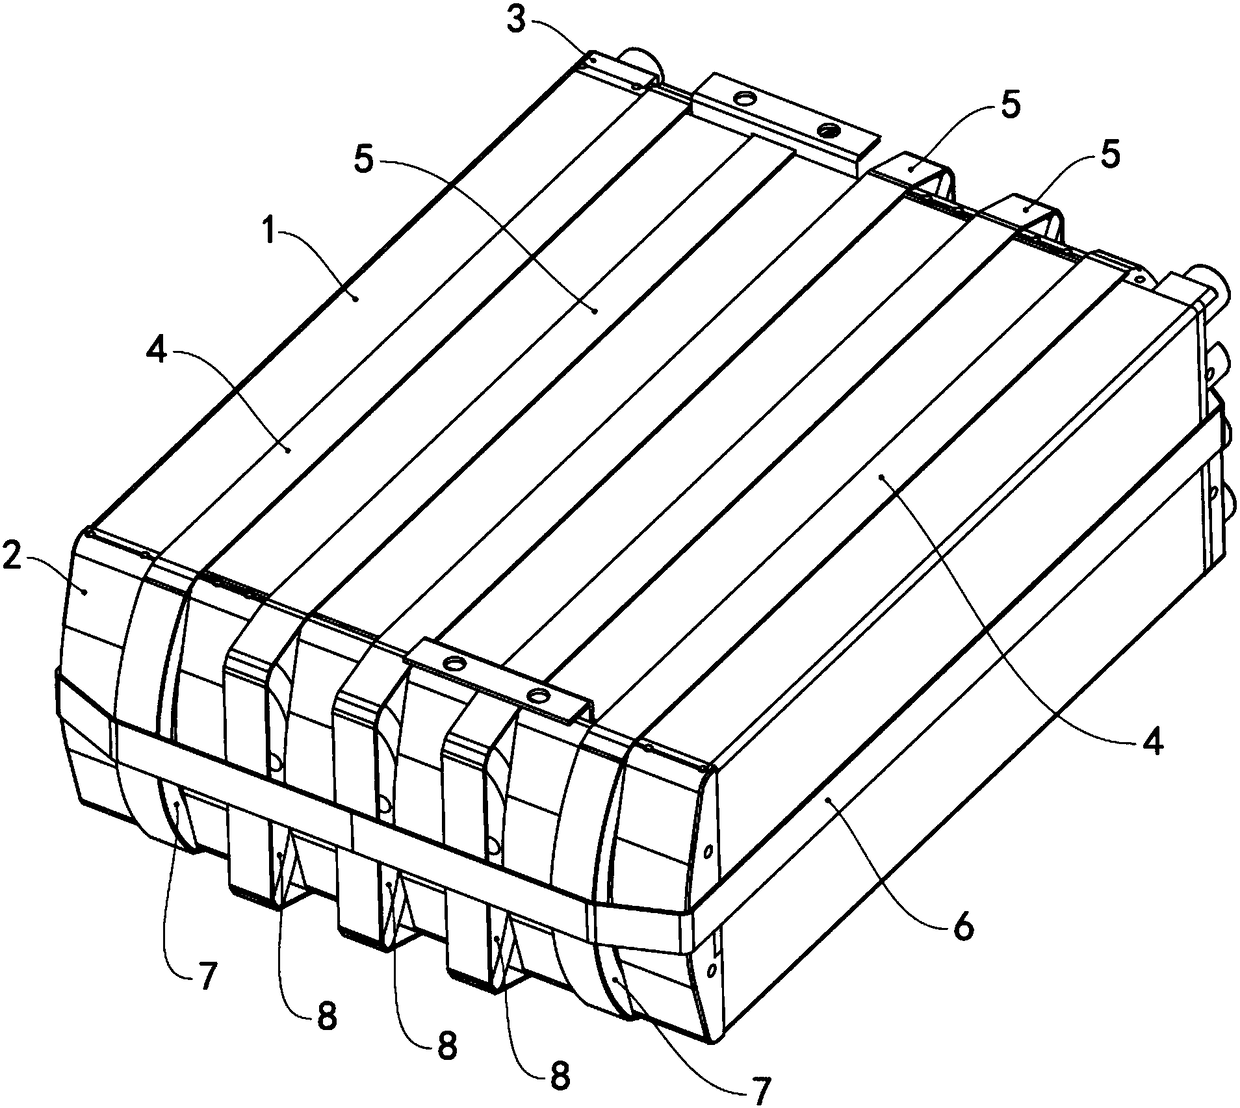 Fastening device for fuel cell stack